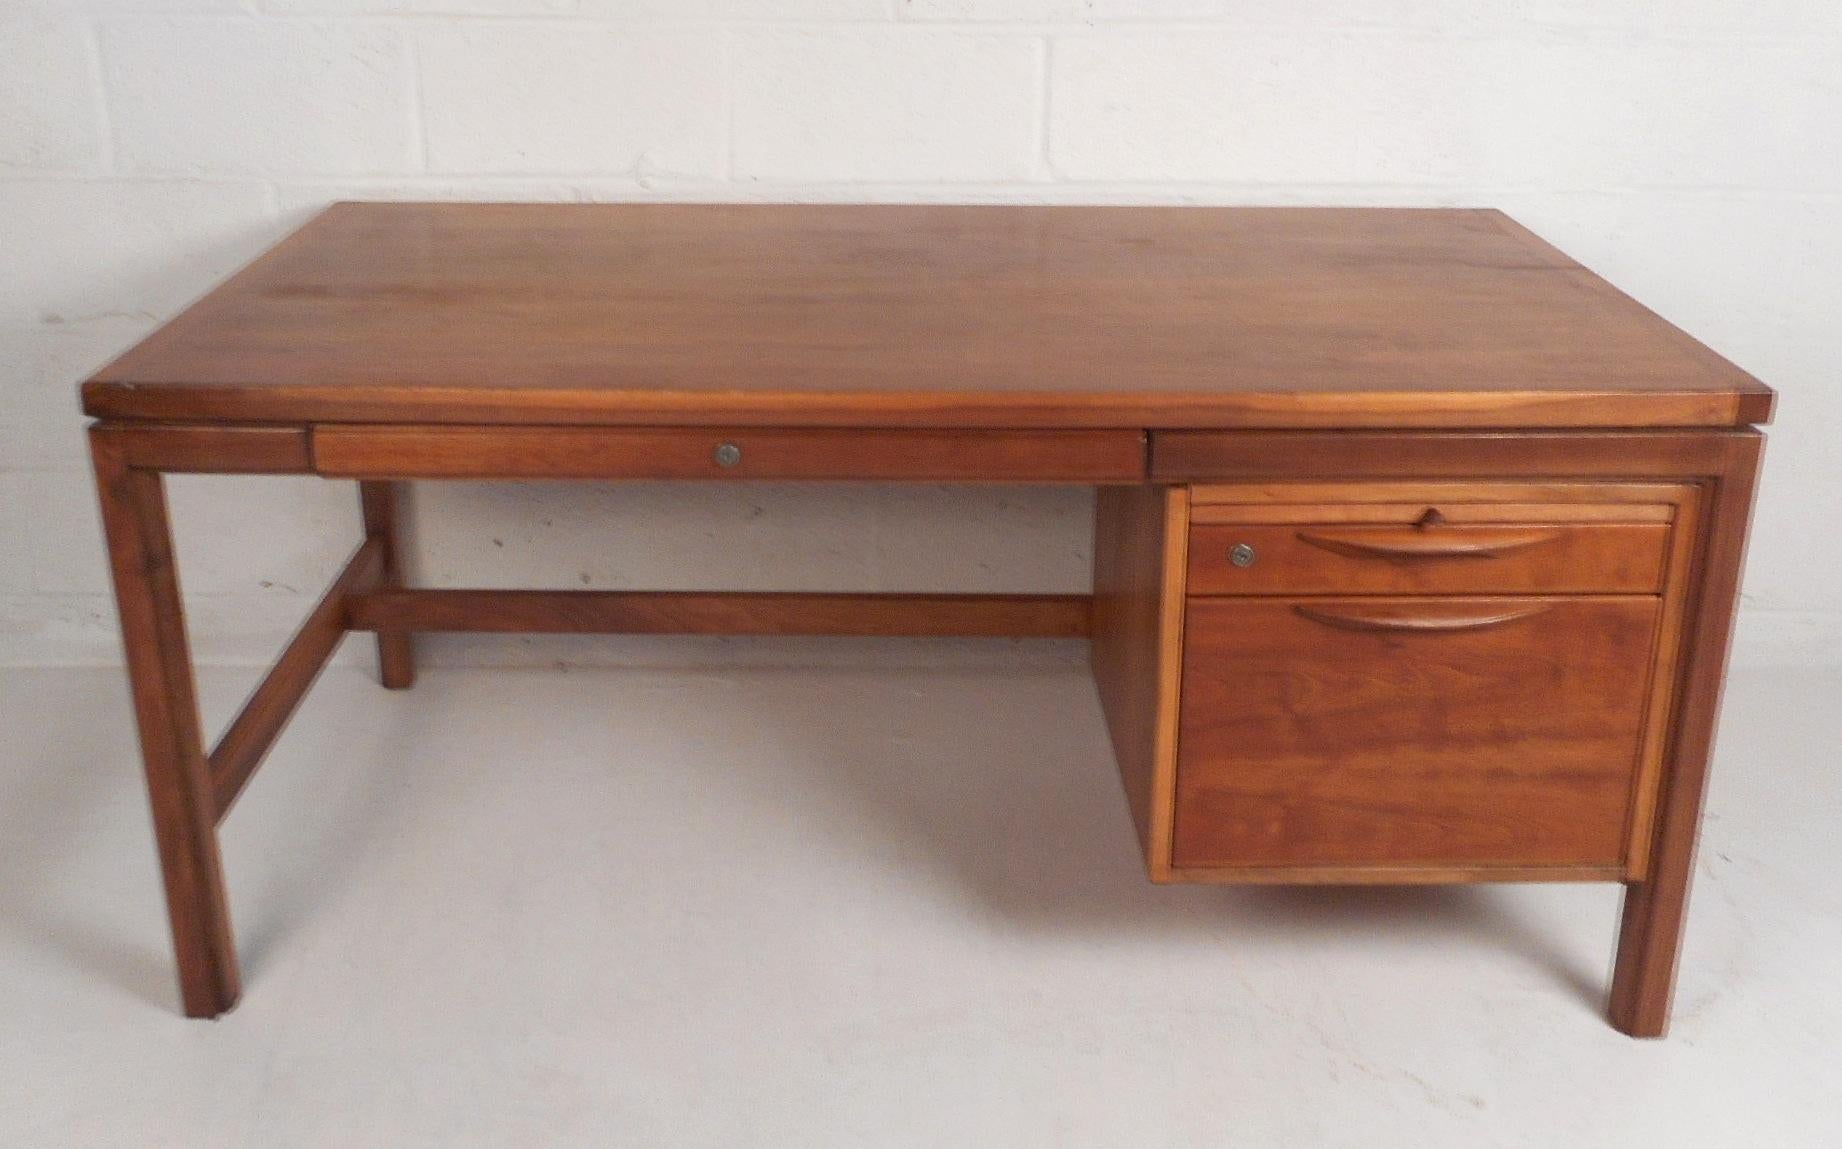 This beautiful Mid-Century Modern desk features three drawers and a pull-out table. A stylish design with plenty of room for storage and plenty of work space. Quality construction with sculpted drawer pulls and a finished back. This newly refinished